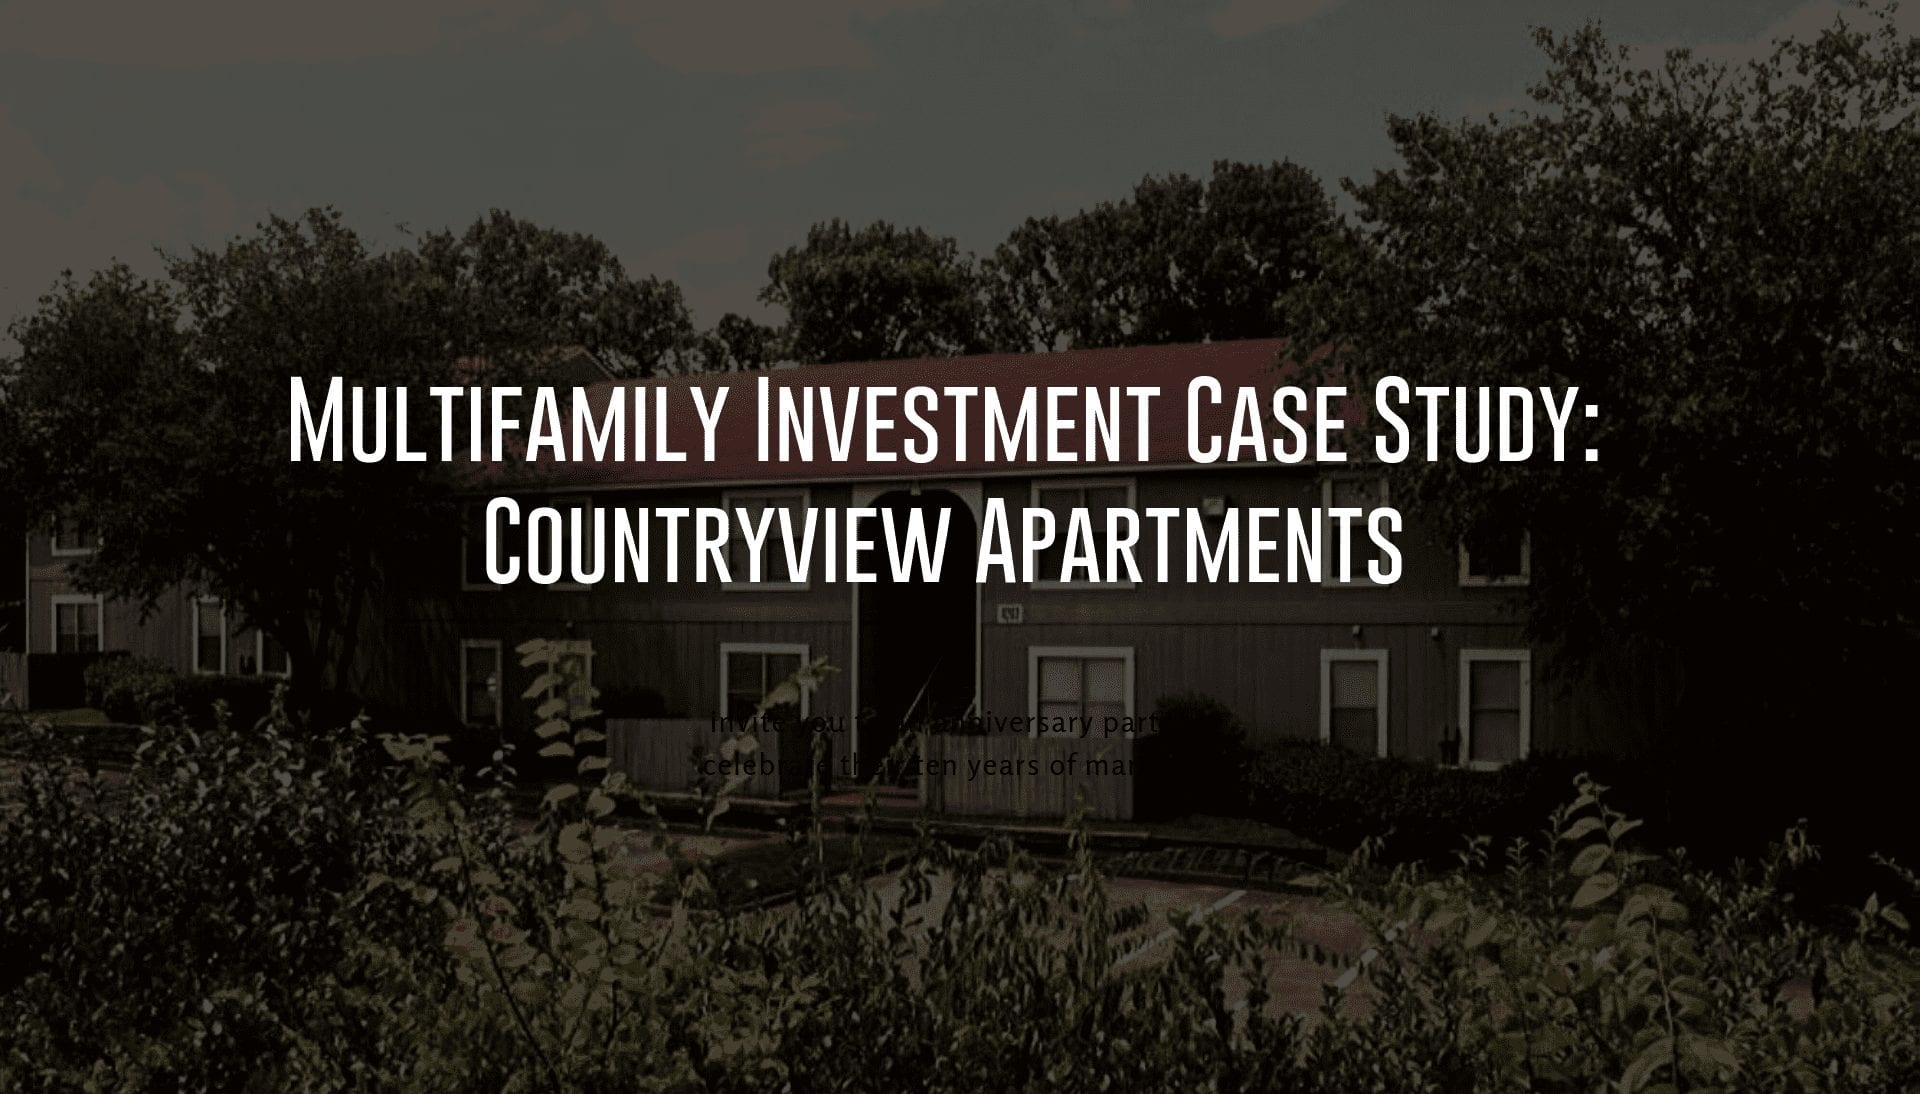 Multifamily Investment Case Study: Countryview Apartments